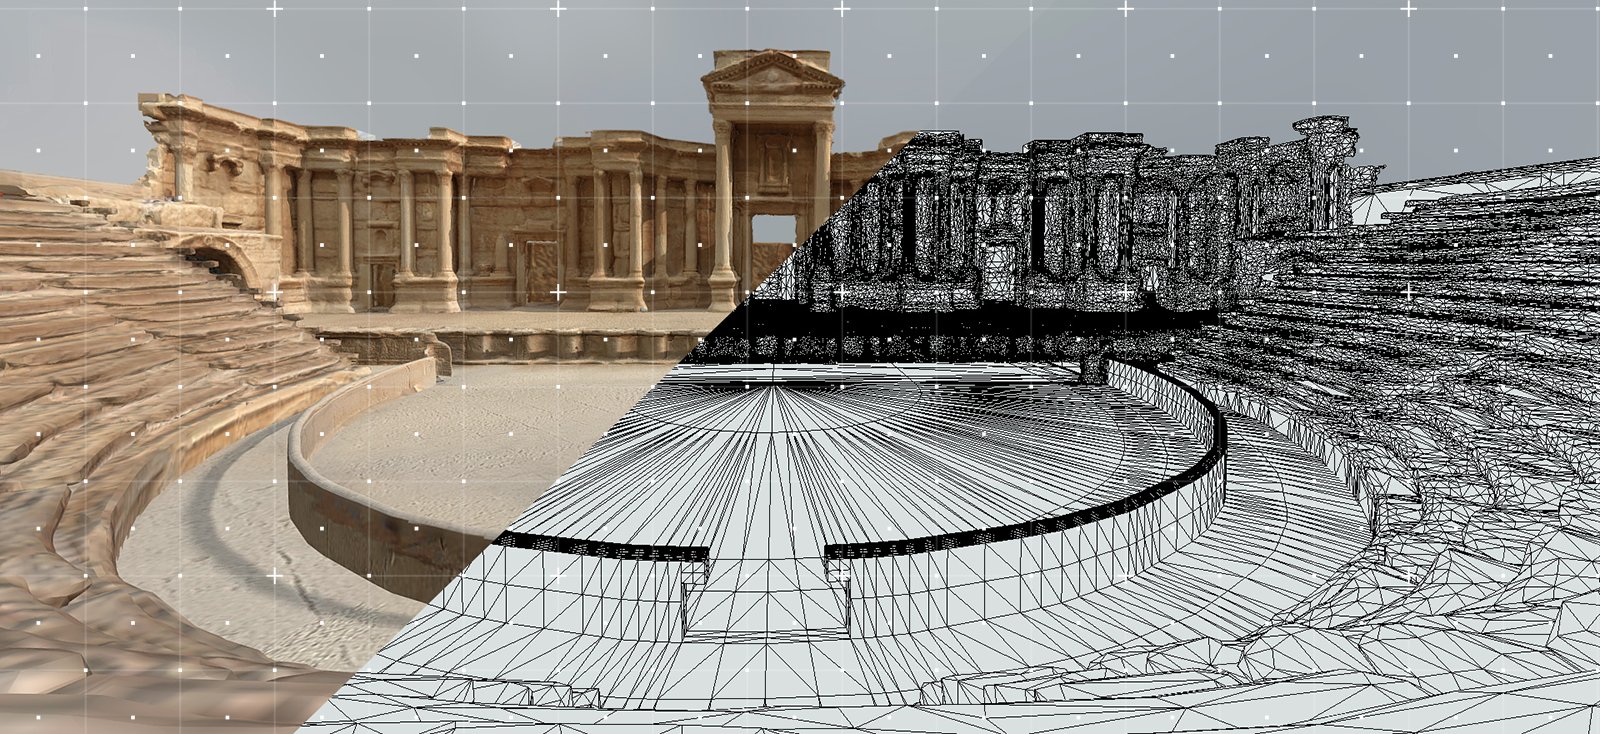 Perpetuity | Palmyra by The Arc/k Project consists of several sites: the Temple of Bel, the Arch of Triumph, The Roman Theatre, and the Fakhr-al-Din al-Ma’ani Castle in Palmyra, Syria graphic